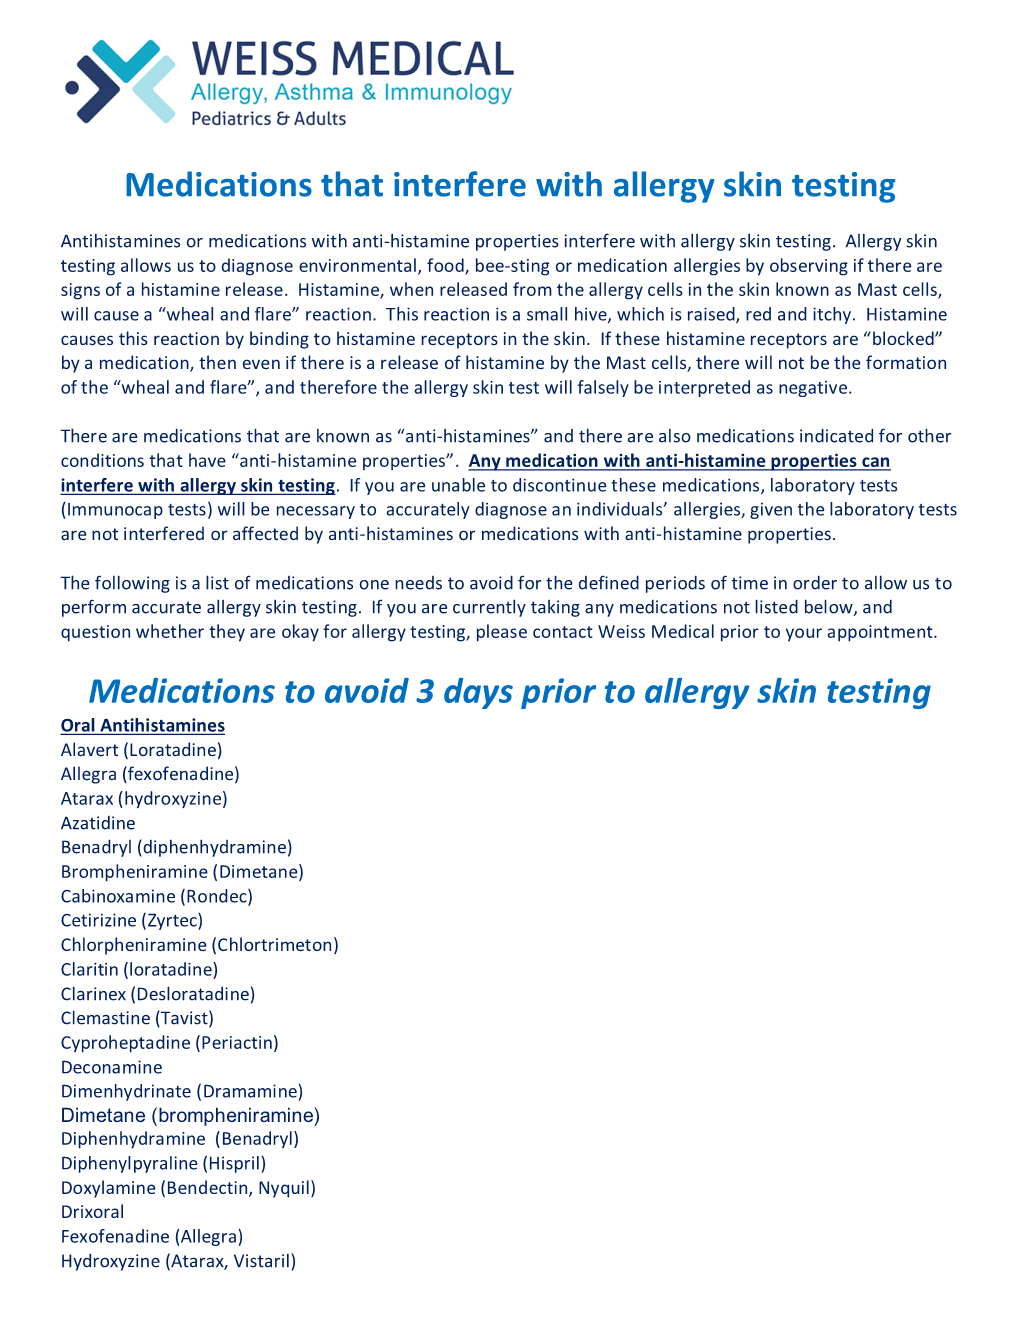 Medications That Interfere with Allergy Skin Testing